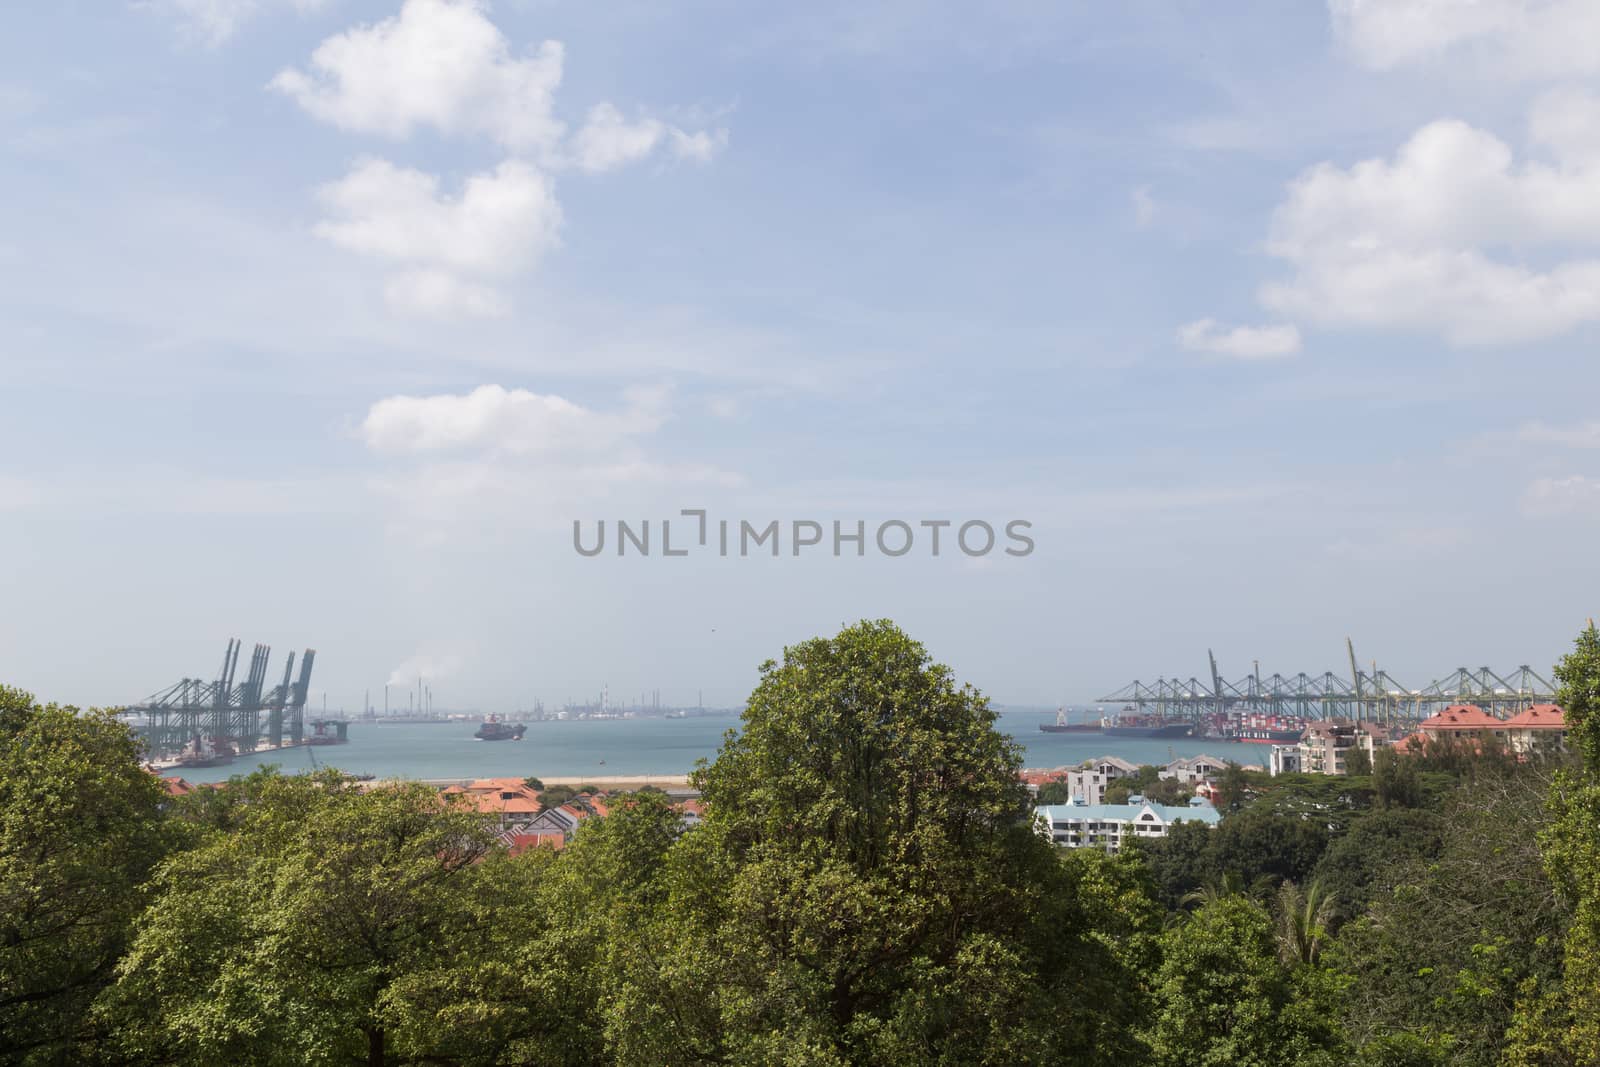 Singapore, Singapore - February 01, 2015: View of the container terminal from the Southern Ridges